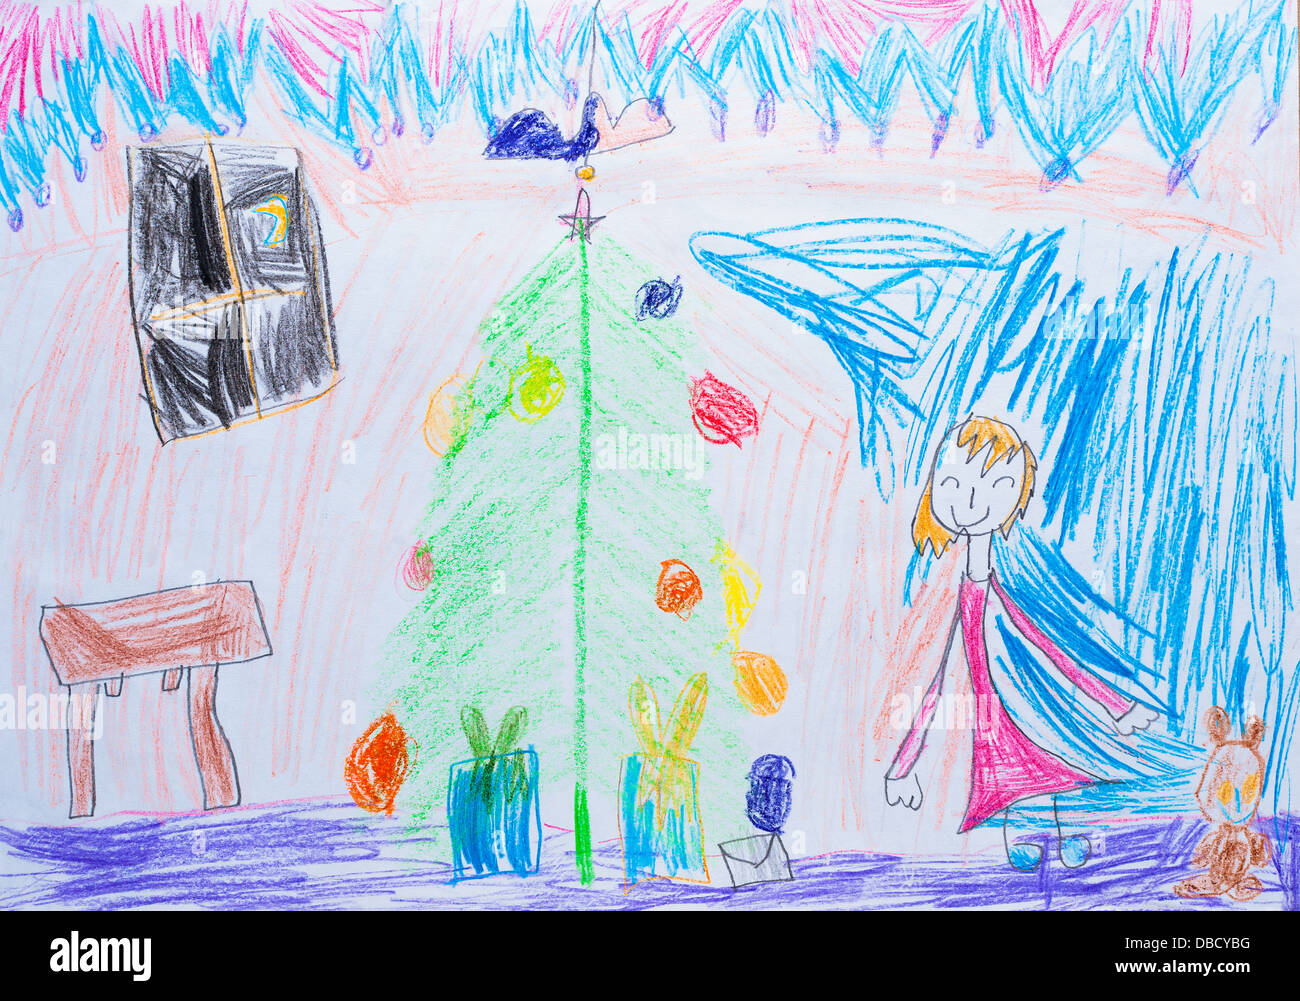 Painted abstract Christmas gifts concept isolated- children drawing Stock  Photo - Alamy